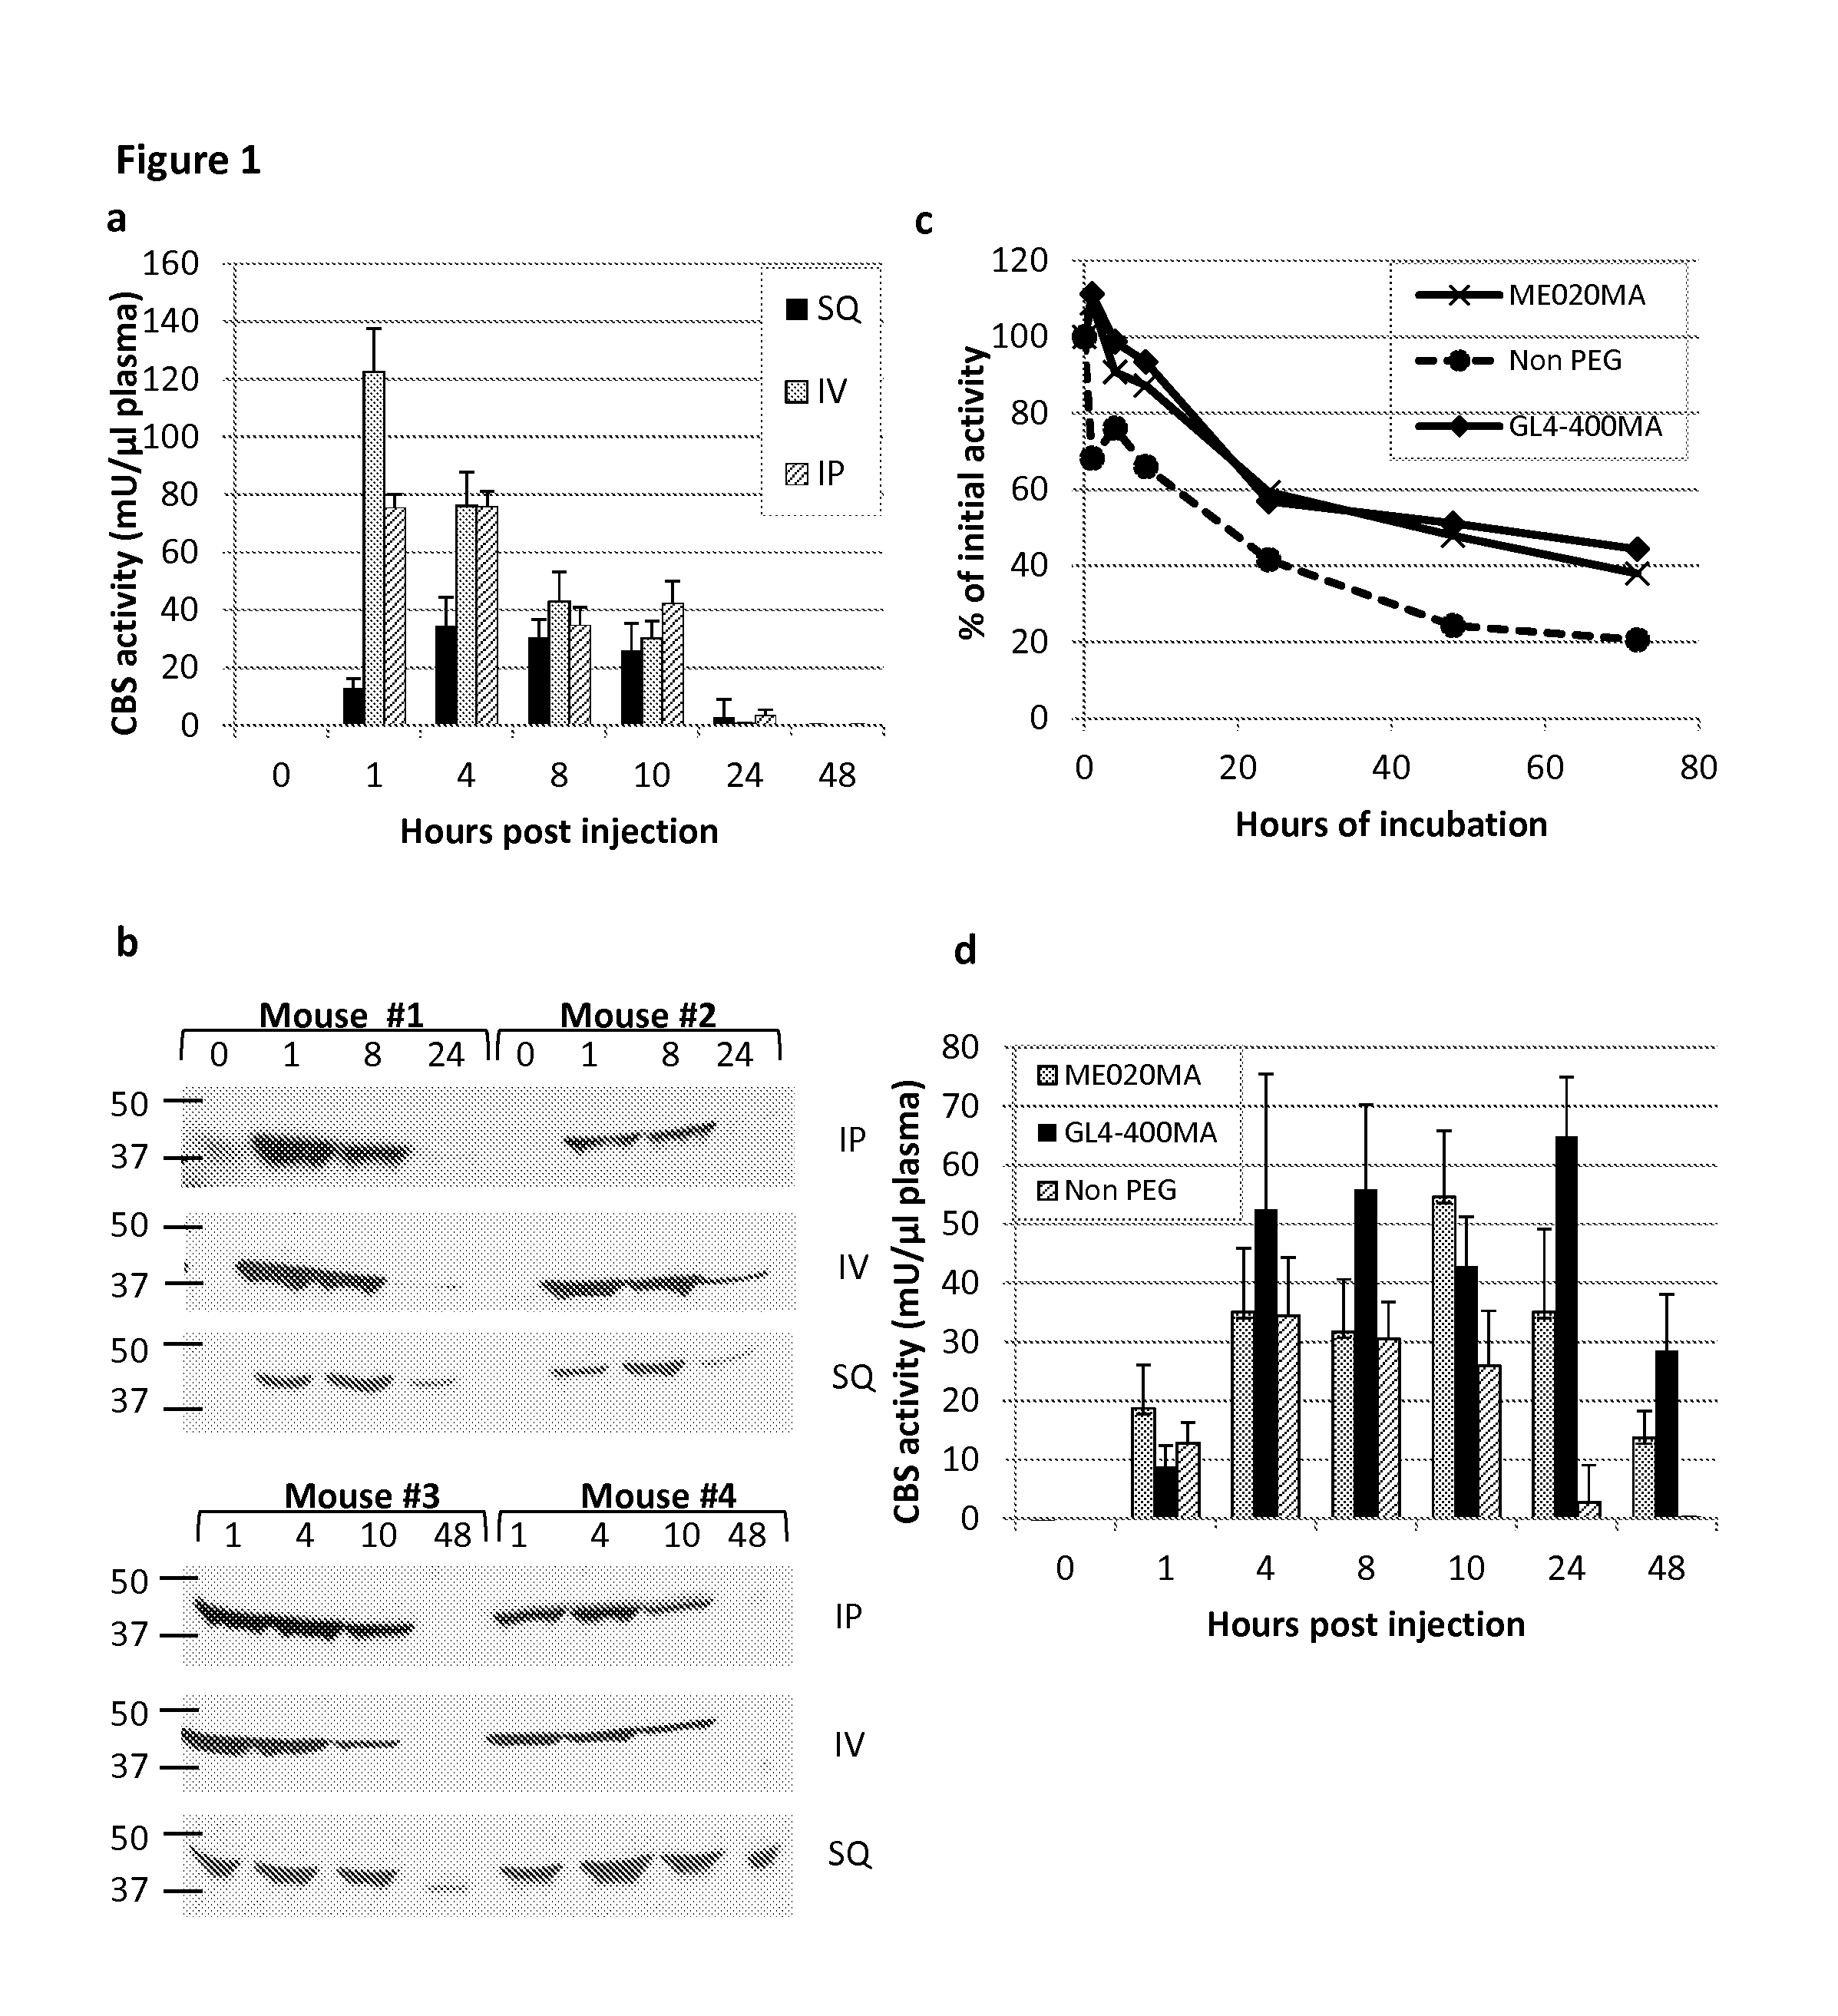 Chemically modified cystathionine beta-synthase enzyme for treatment of homocystinuria